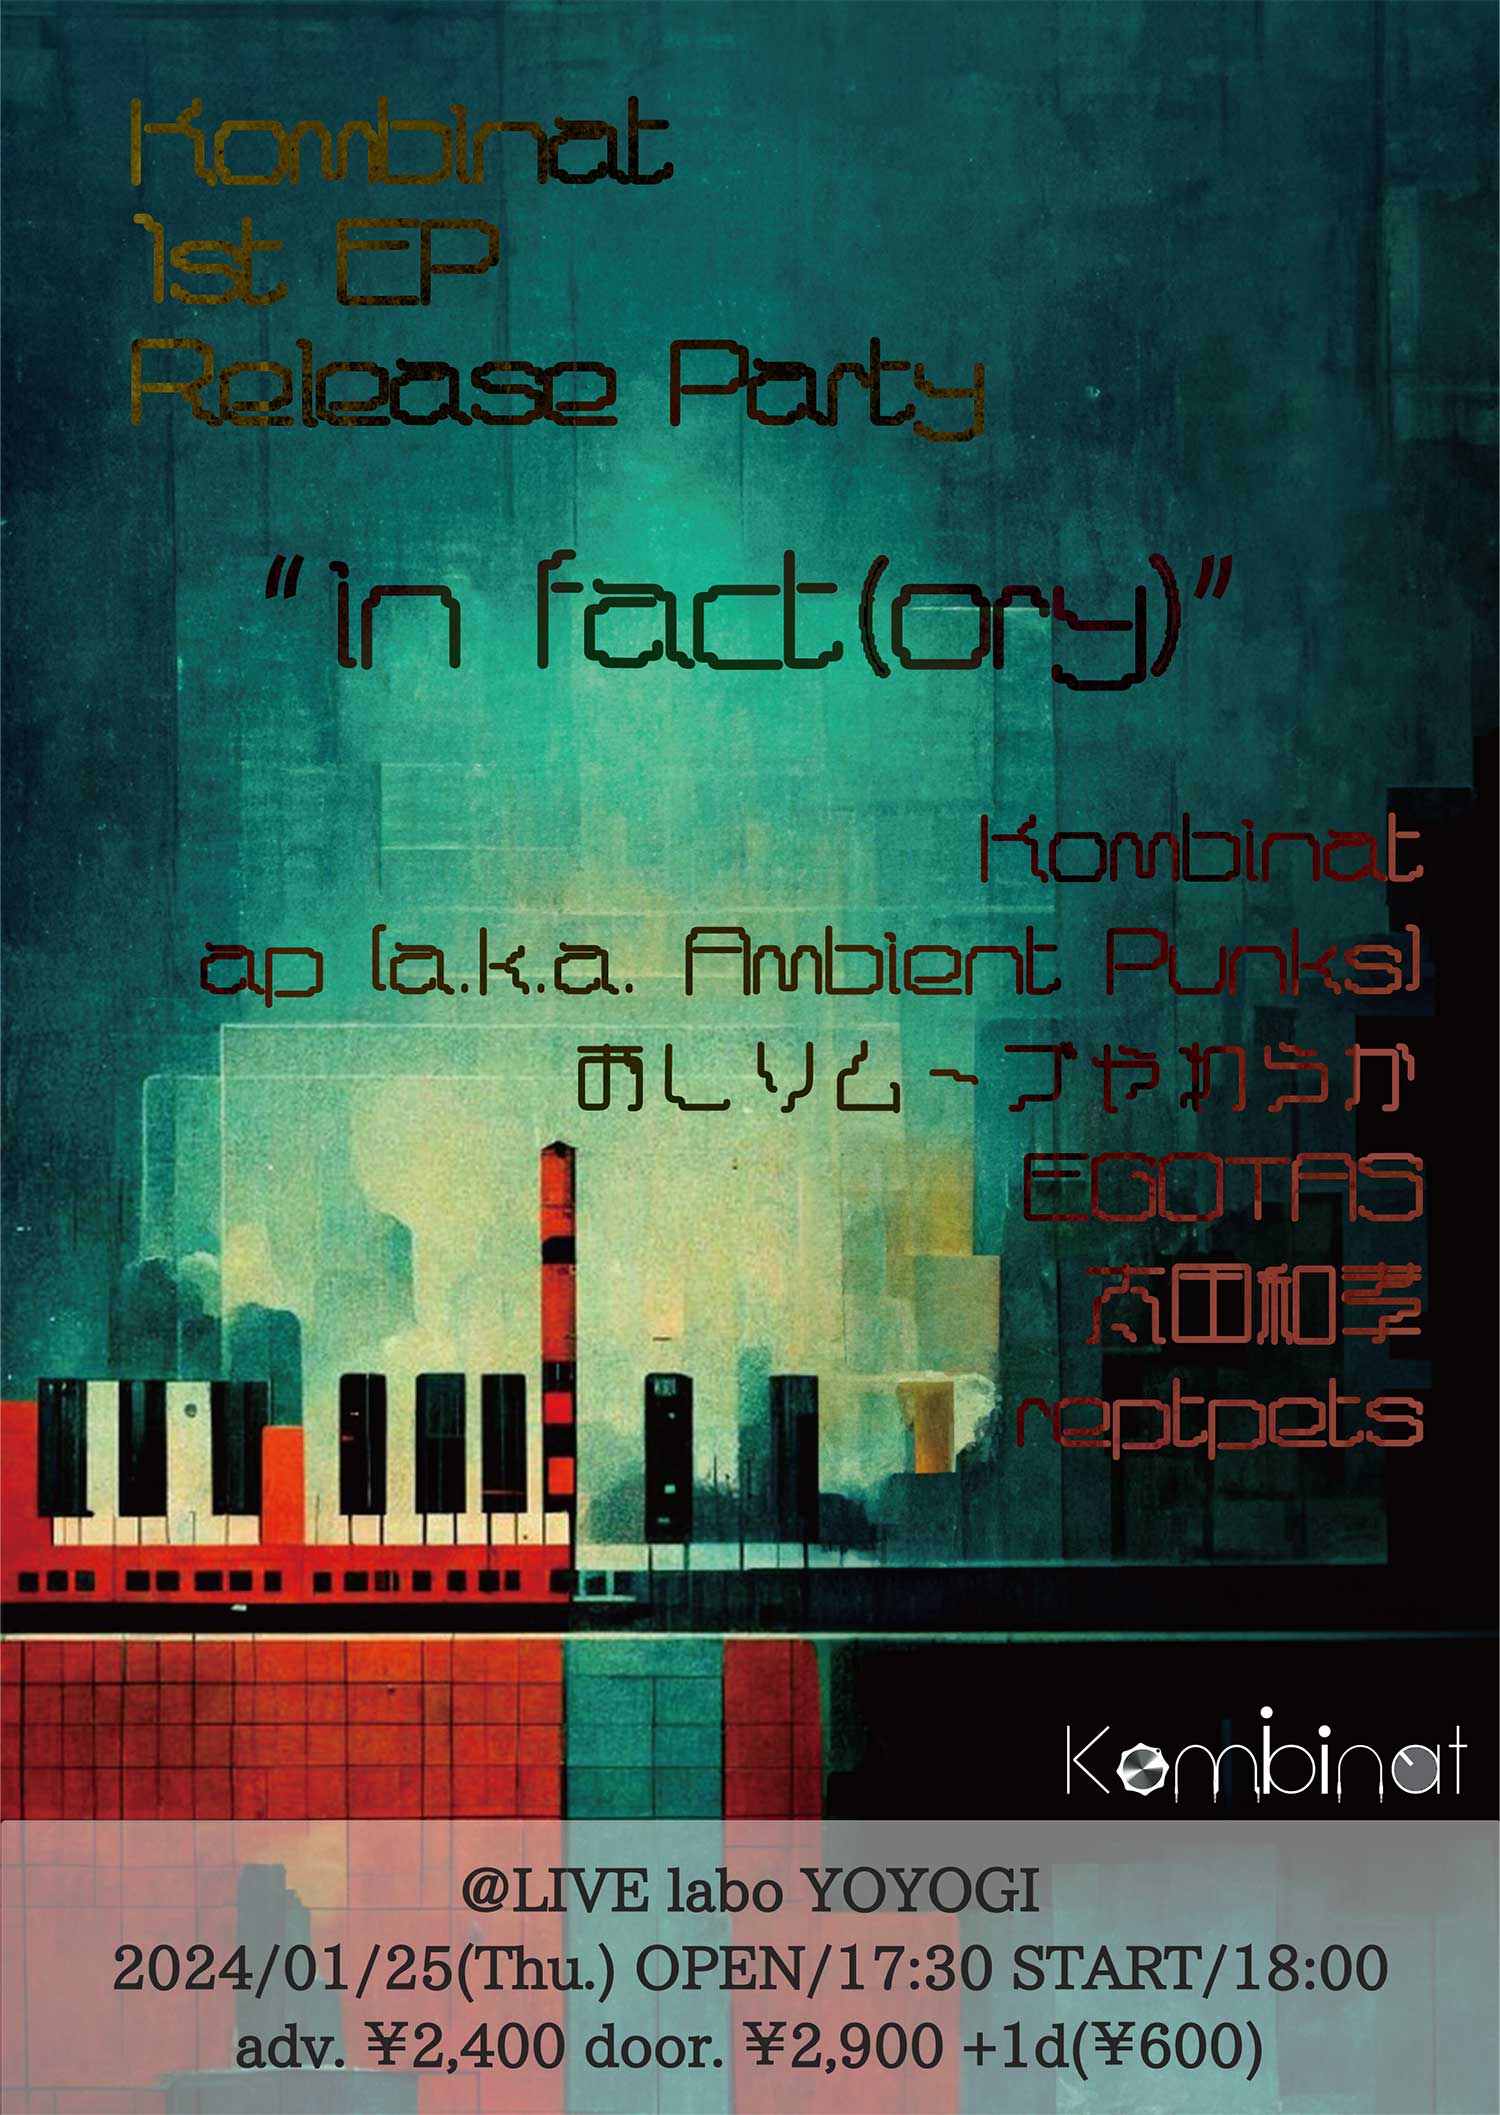 Kombinat 1stEP Release Party
"In fact(ory)"